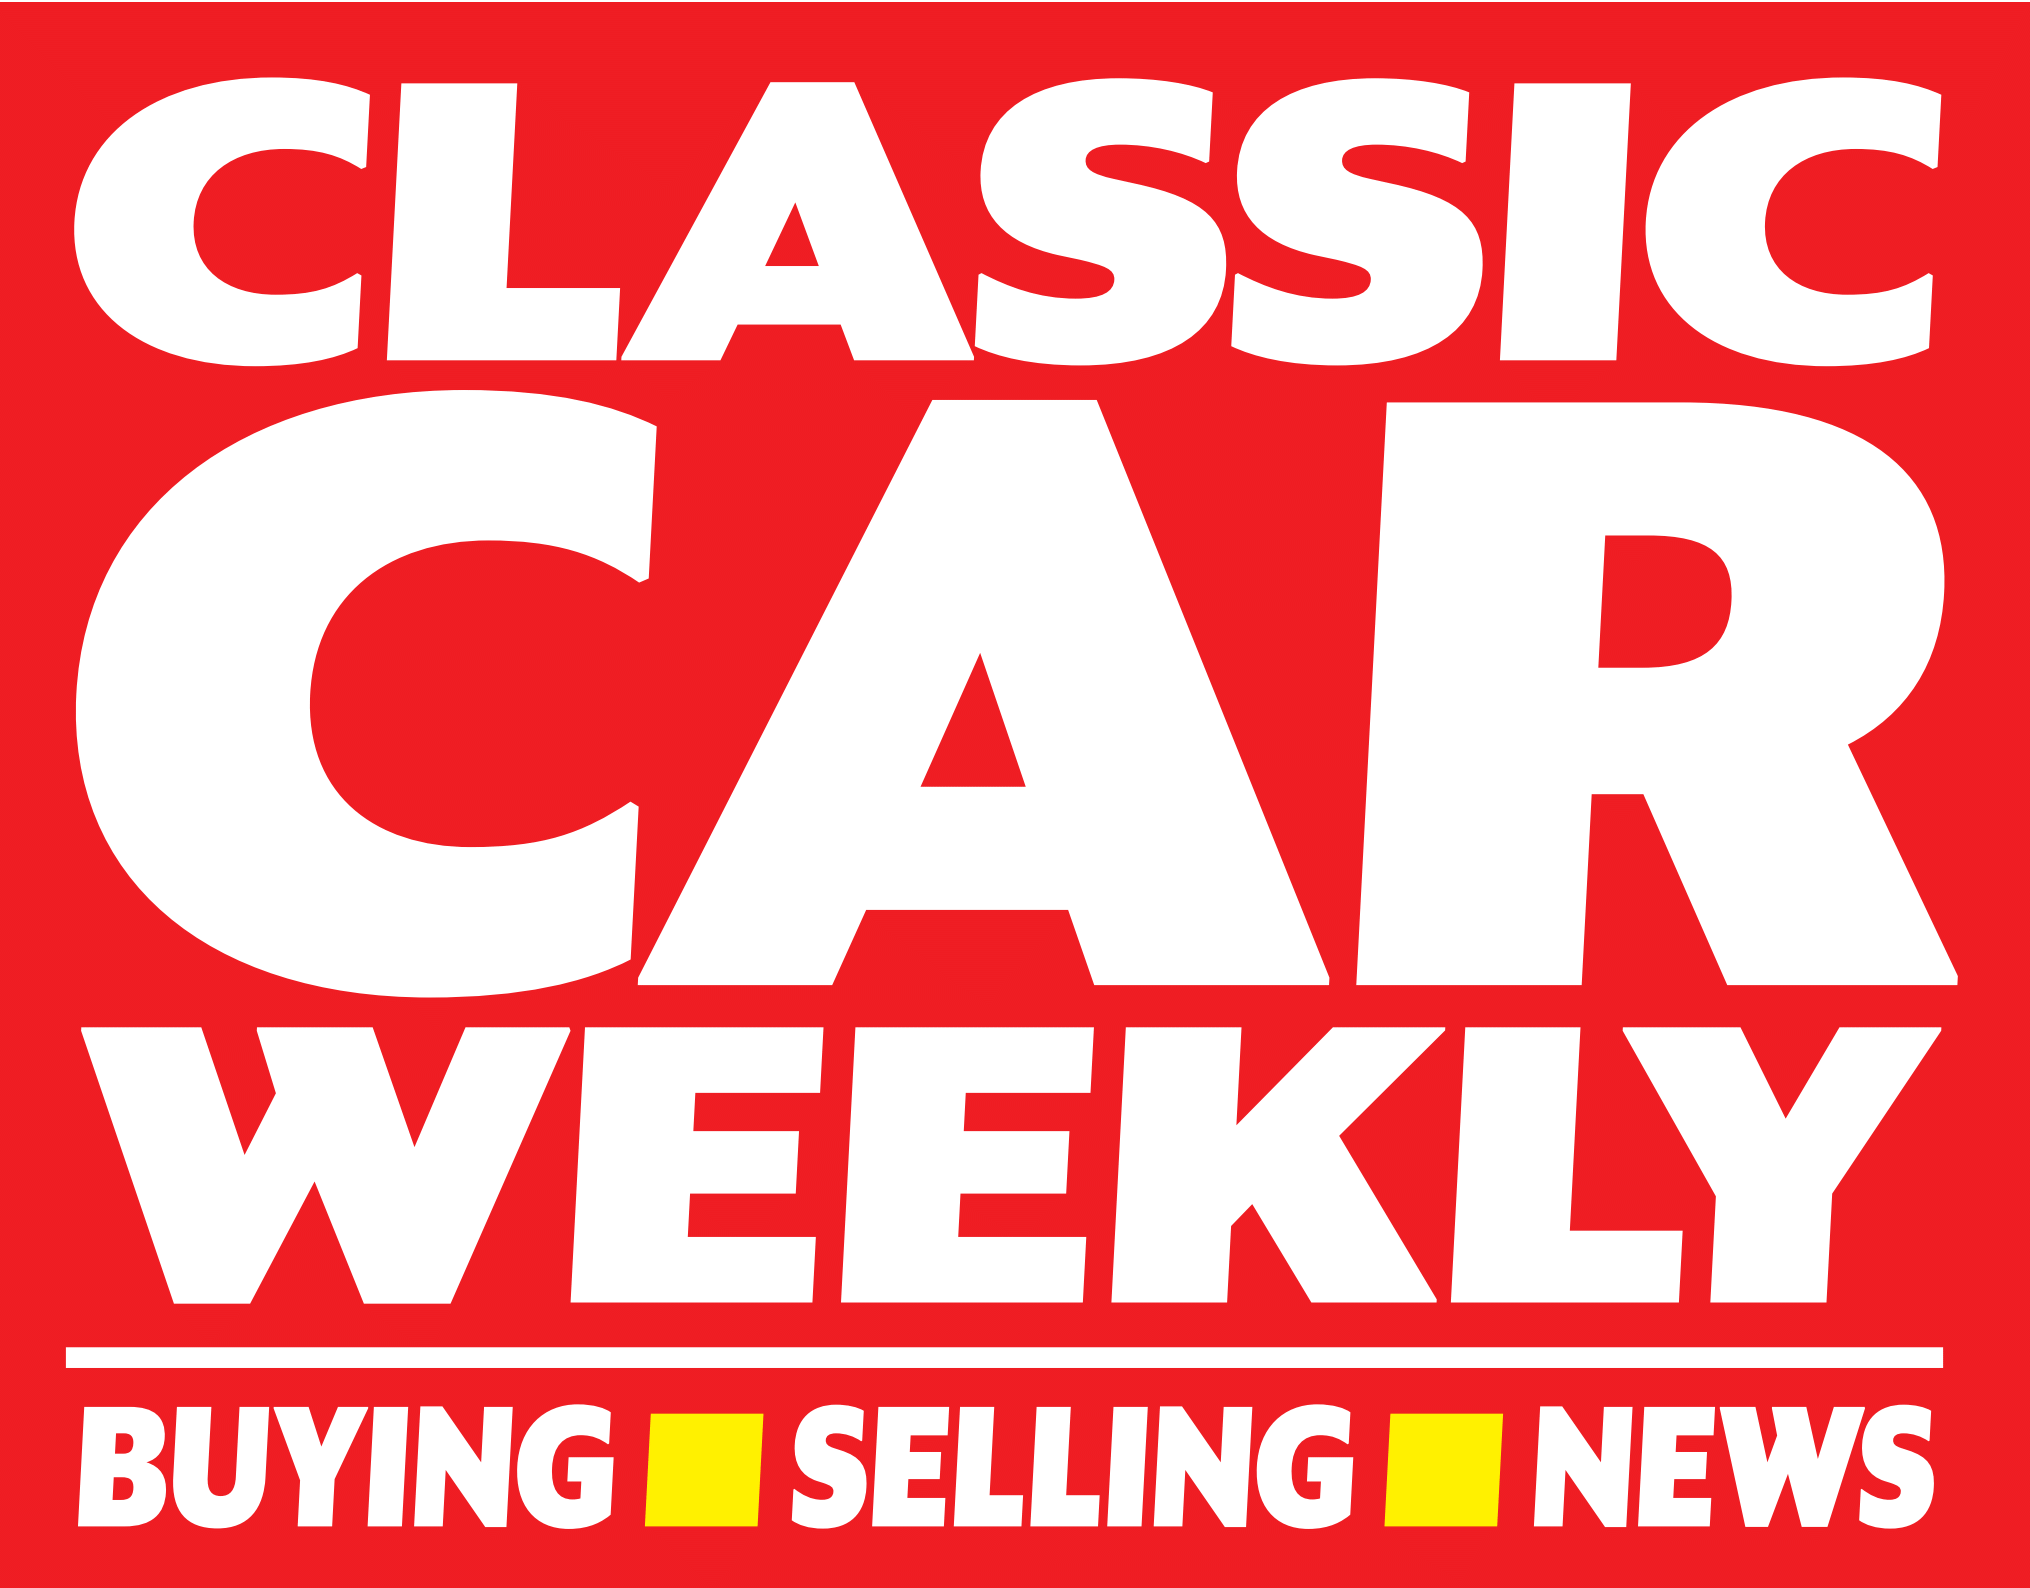 Classic Car Weekly - Living with Classics